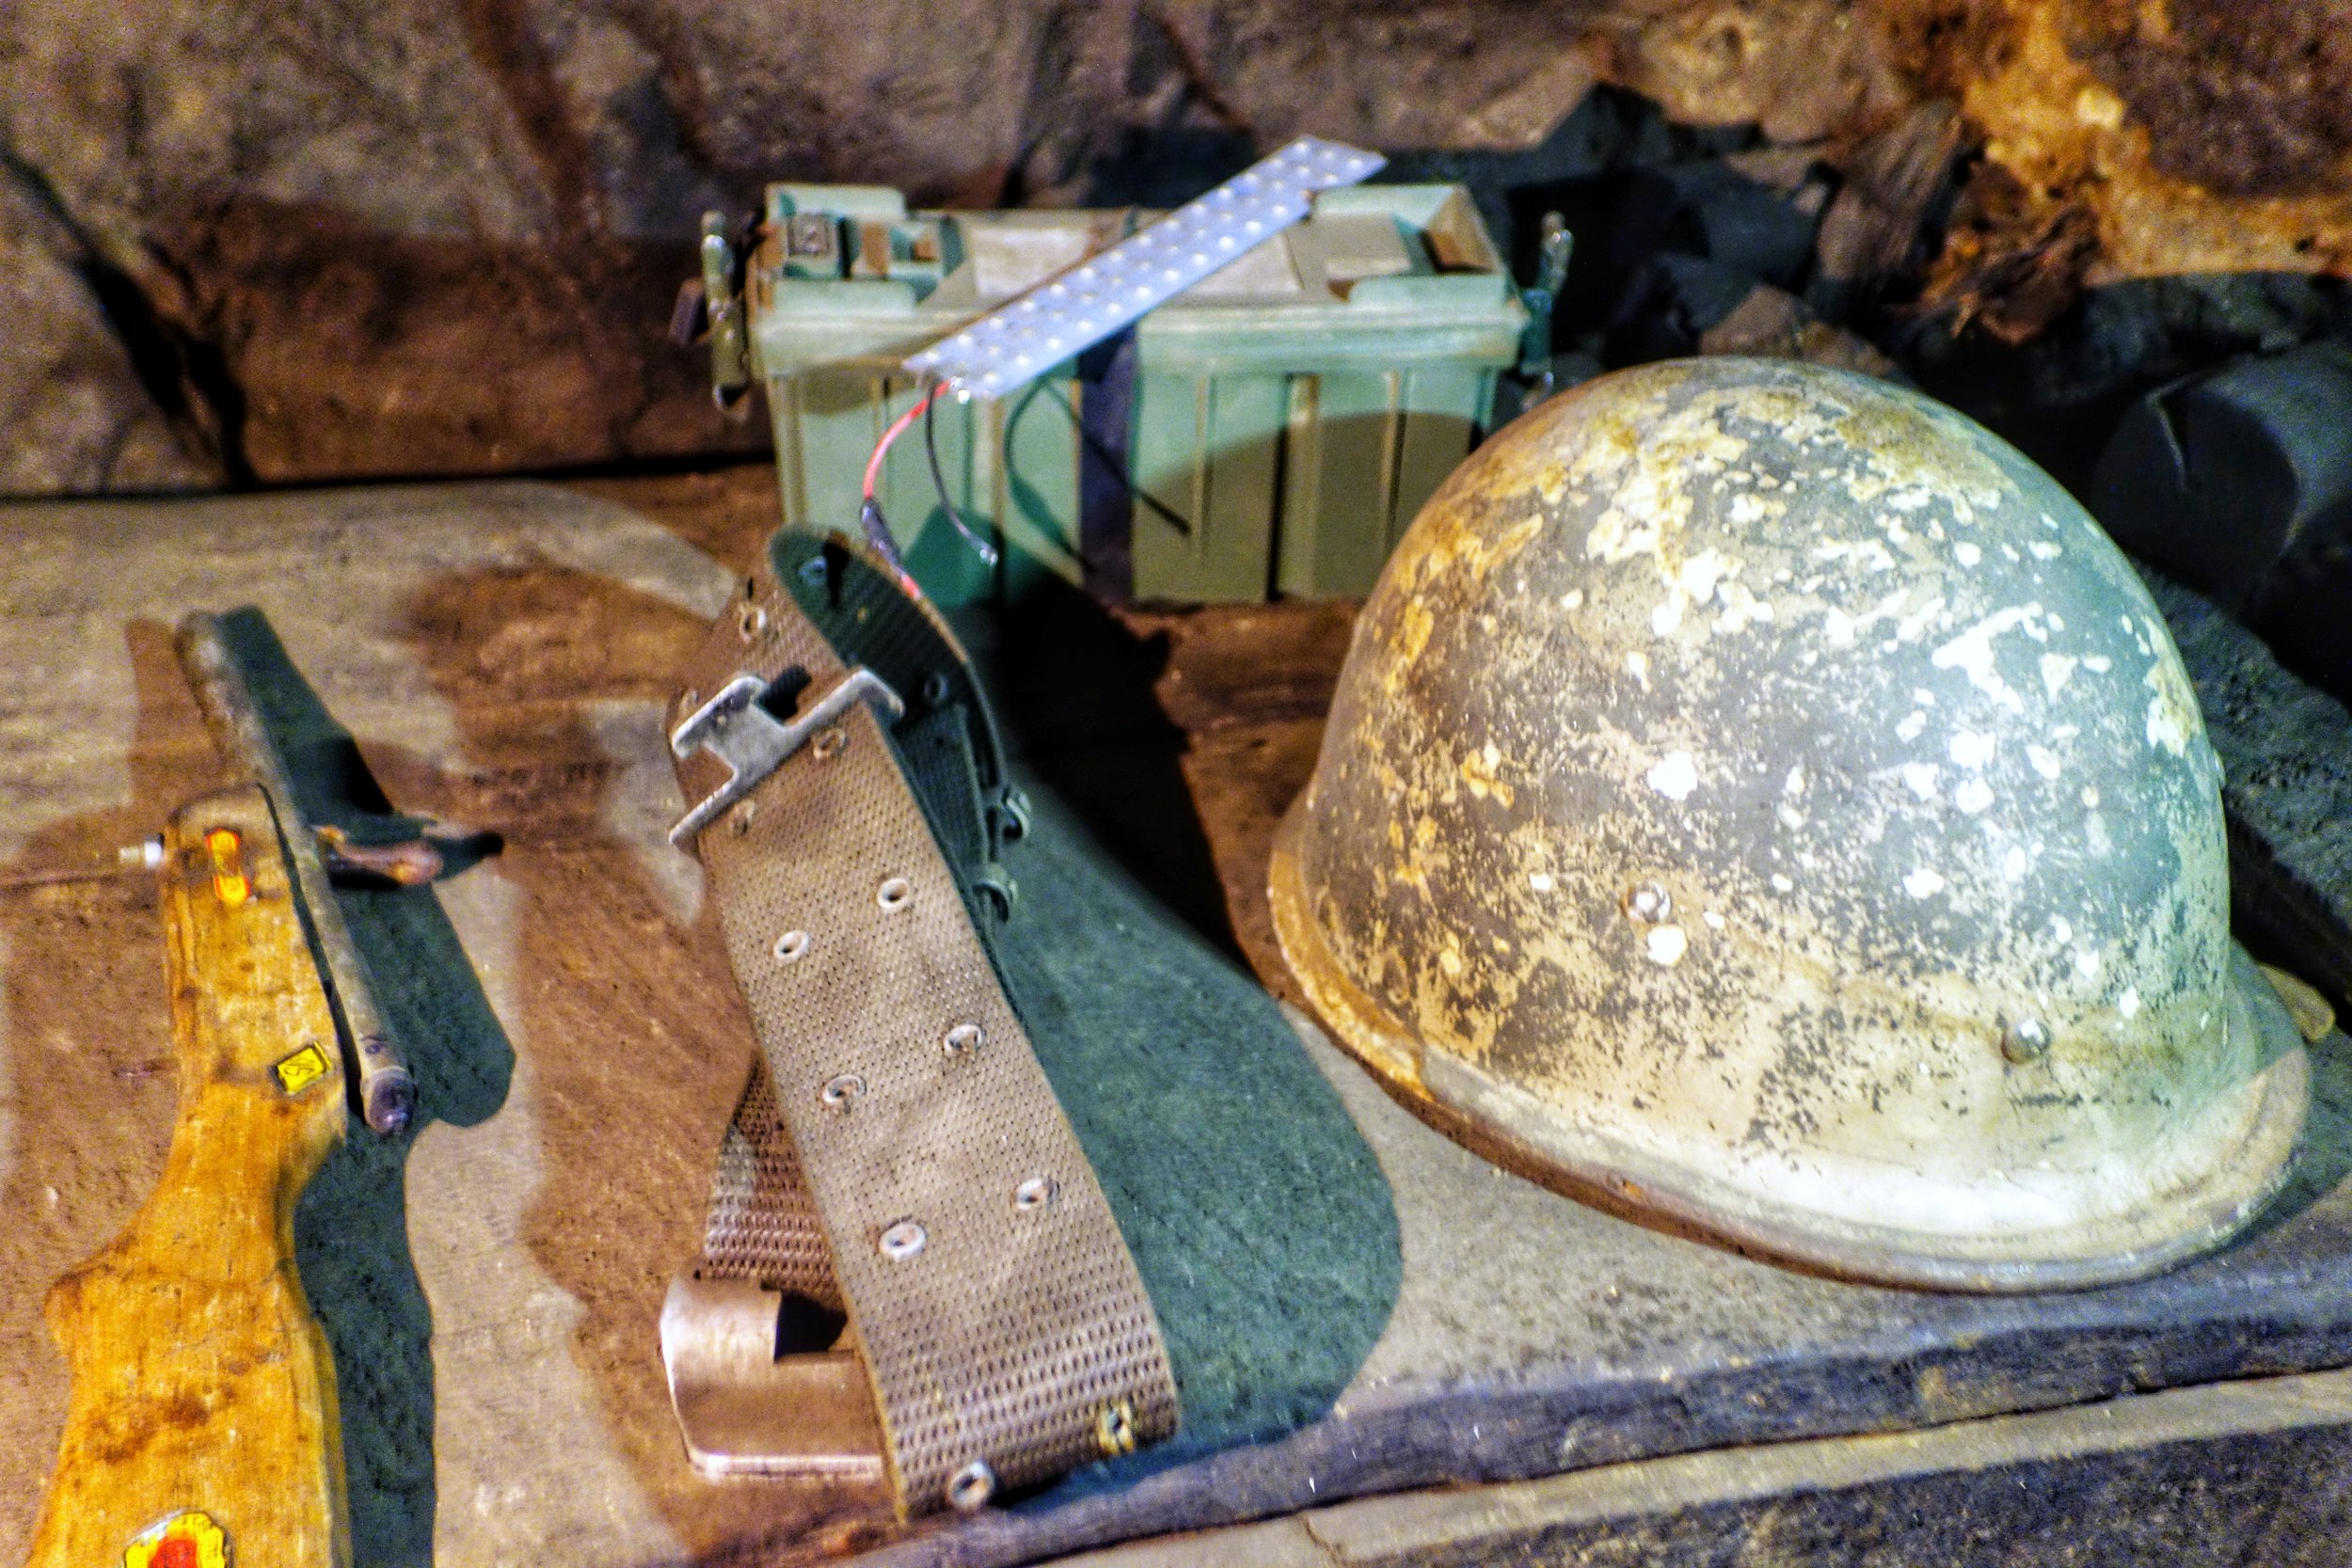 A Old Pakistani Belt and Helmet left over from the 1971 war. Also a Toy gun.